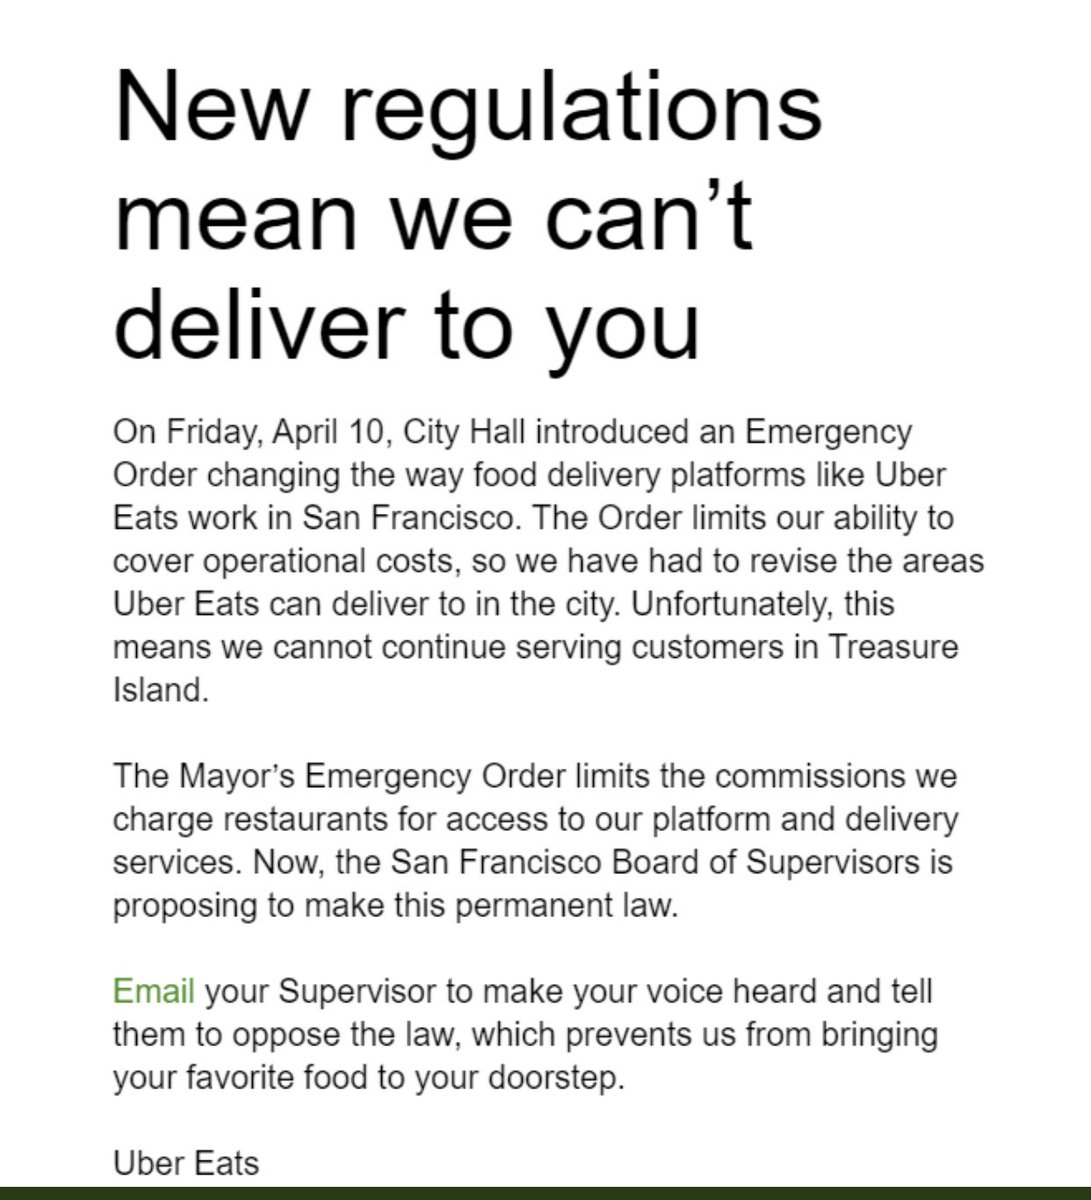 This is DESPICABLE, outrageous behavior from  @UberEats. They are now saying that they can no longer deliver to Treasure Island residents bc of new regulations capping commissions. So they are RETALIATING against SF by punishing one of our most low income, isolated communities